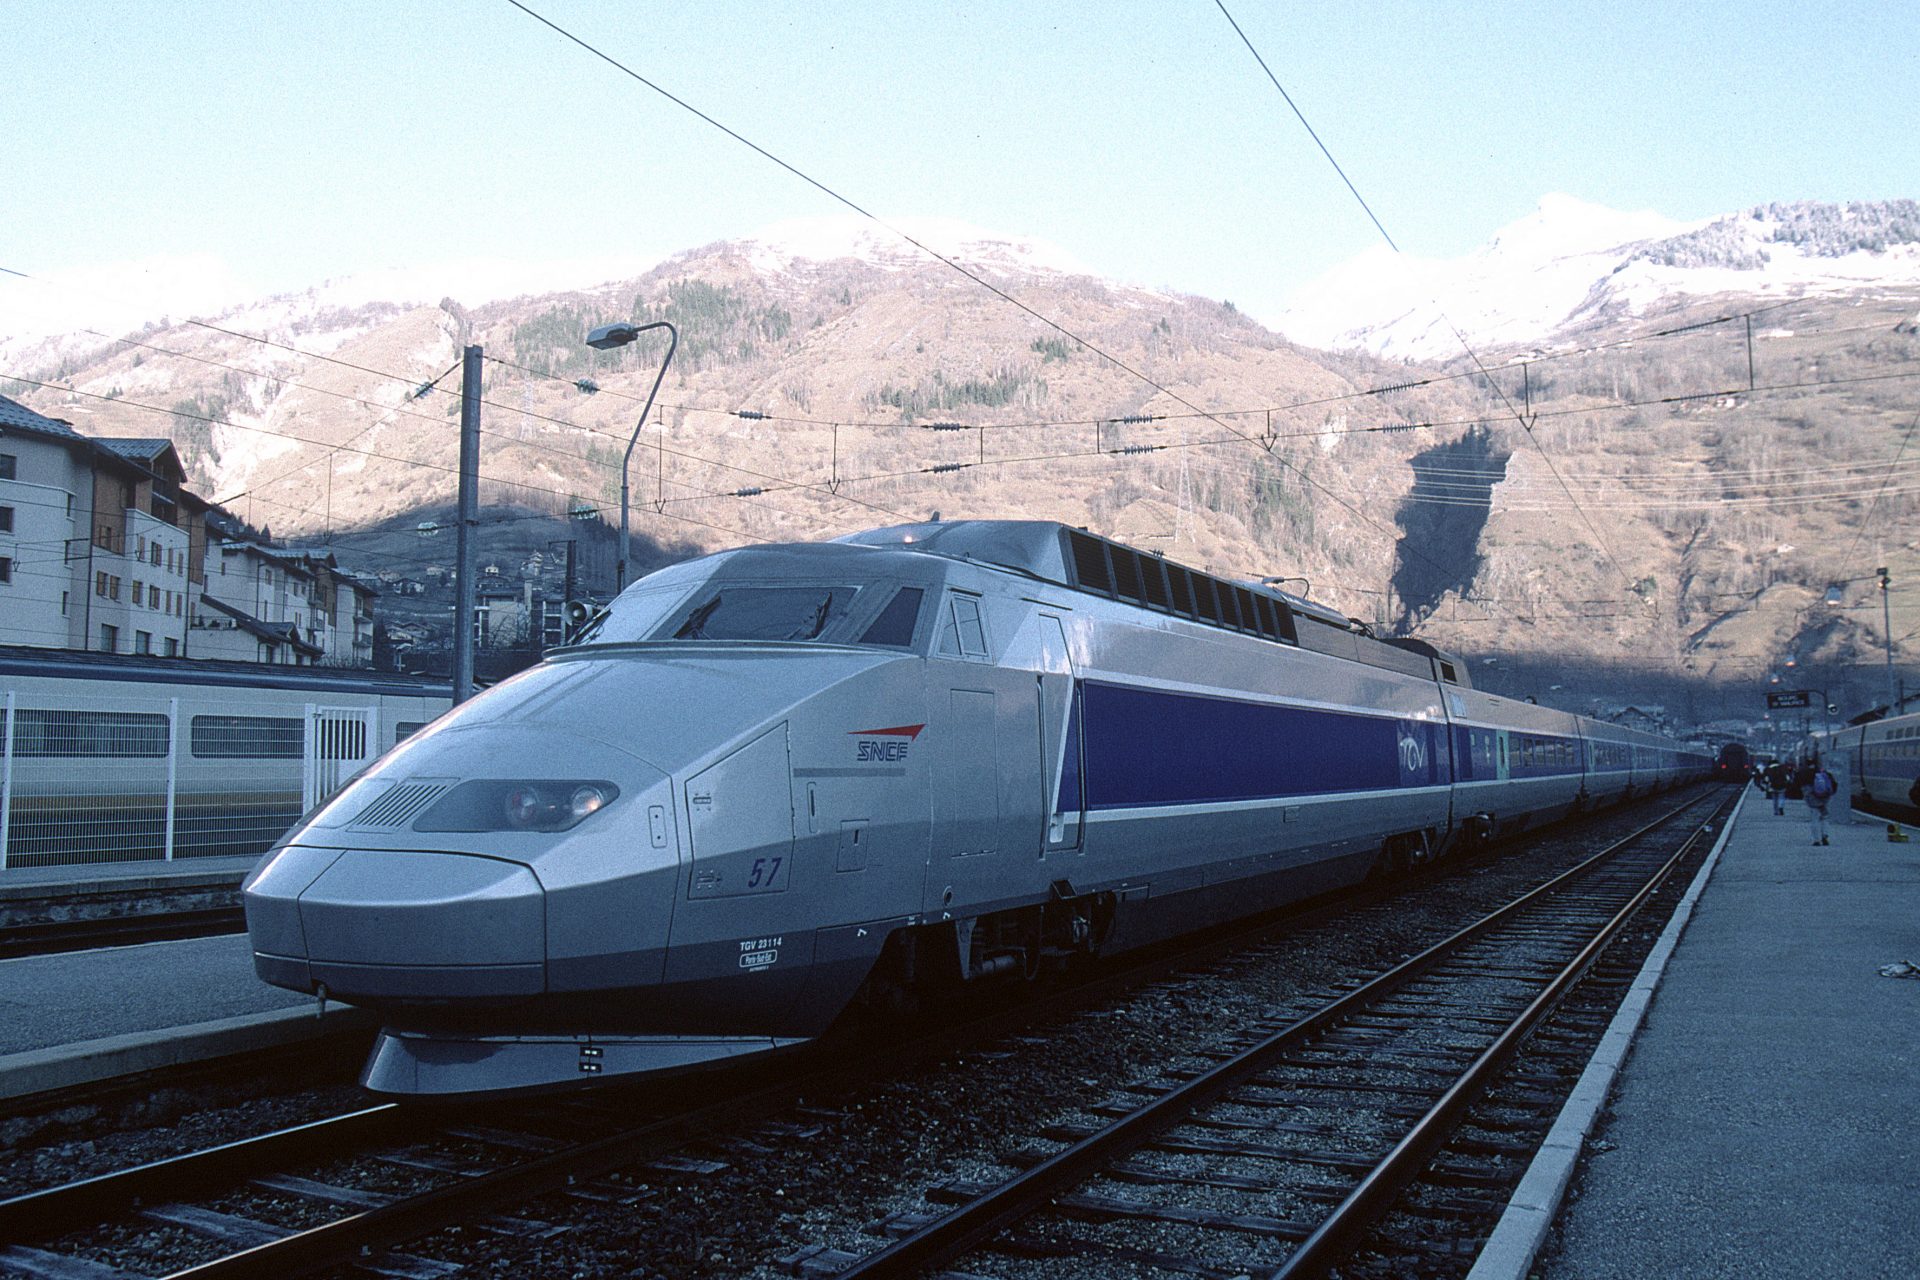 <p><span>The French train company TGV runs trains between Paris, Eastern France, London, and Southern Germany. Trains run up to 320 km per hour on several of these routes. France has earned global recognition for pioneering high-speed rail technology. </span></p>